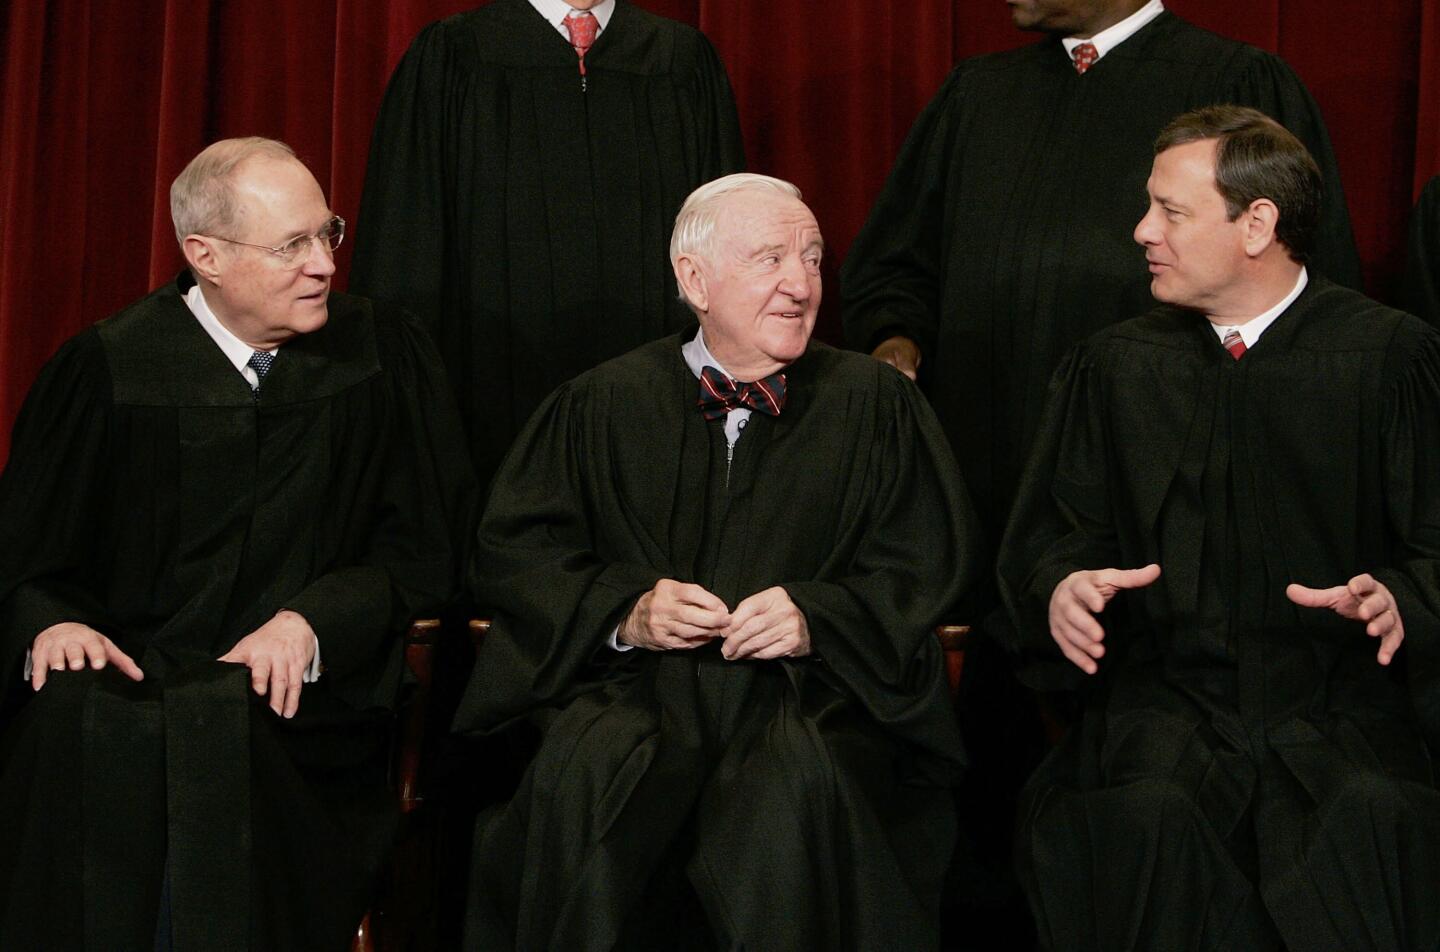 WASHINGTON - MARCH 03: ( L to R), Justice Anthony M. Kennedy, Justice John Paul Stevens, Chief Justice John G. Roberts chat during a photo seesion with photographers at the U.S. Supreme Court March 3, 2006 in Washington DC. (Photo by Mark Wilson/Getty Images)